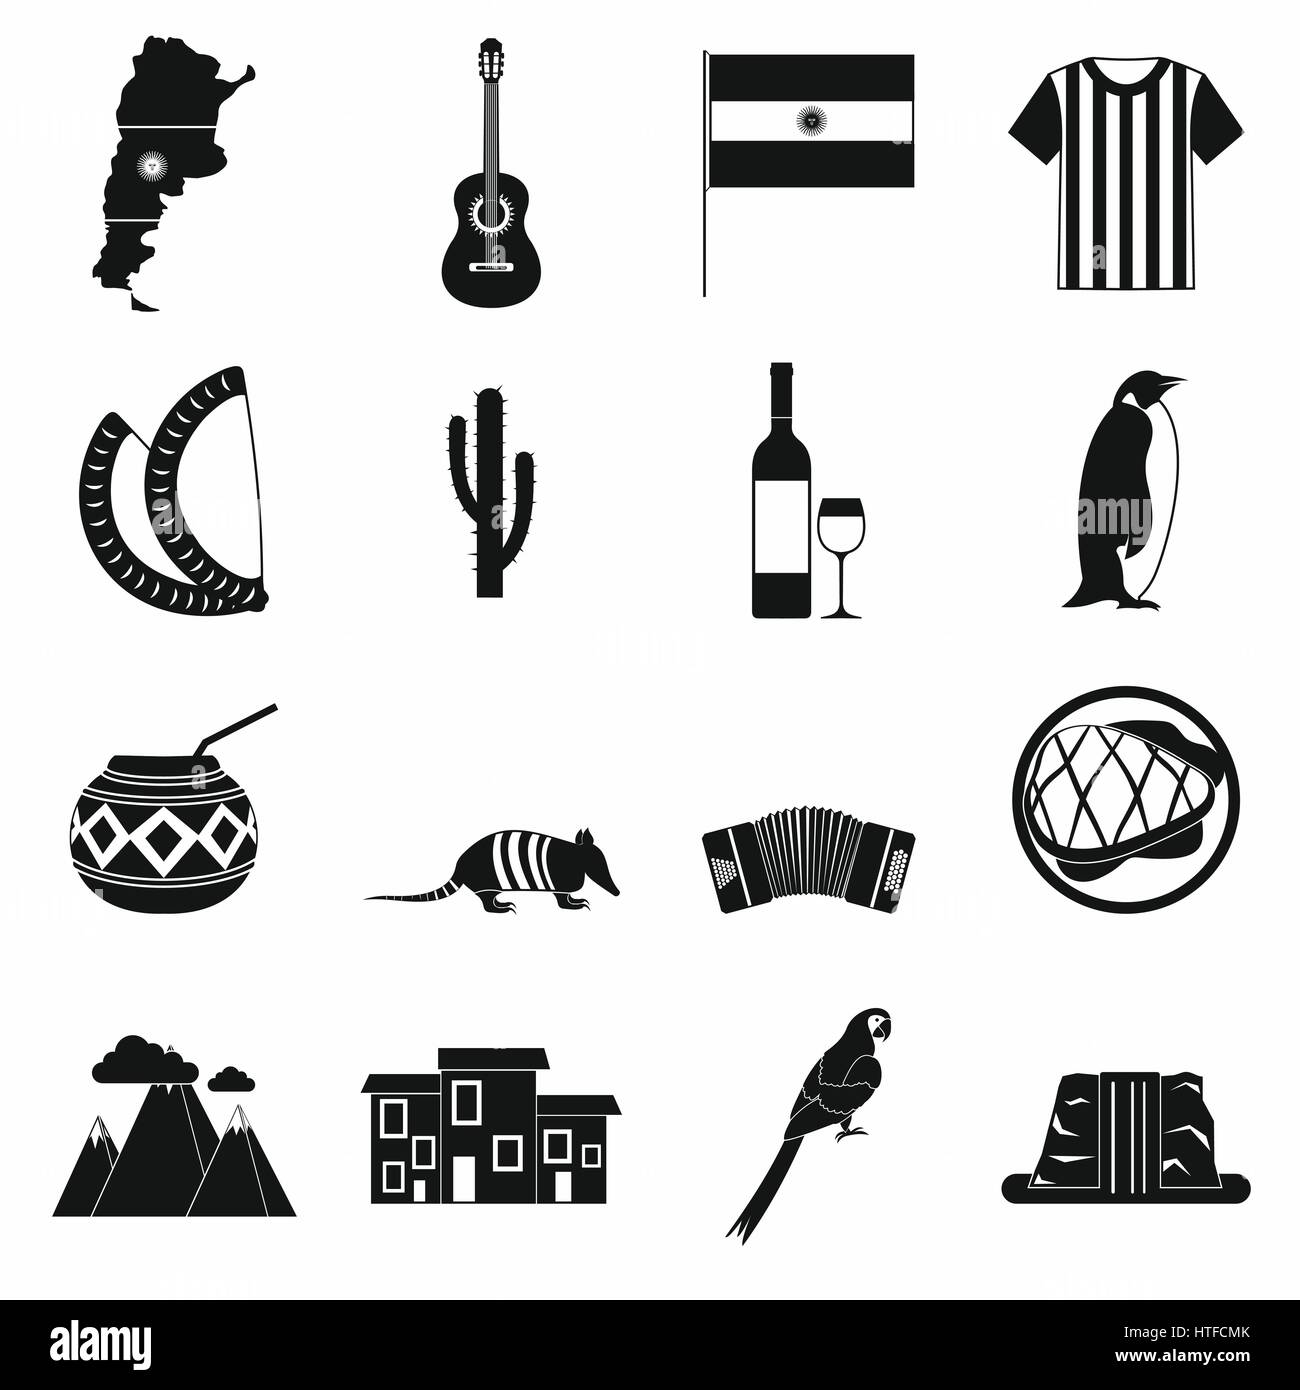 Argentina set icons Stock Vector